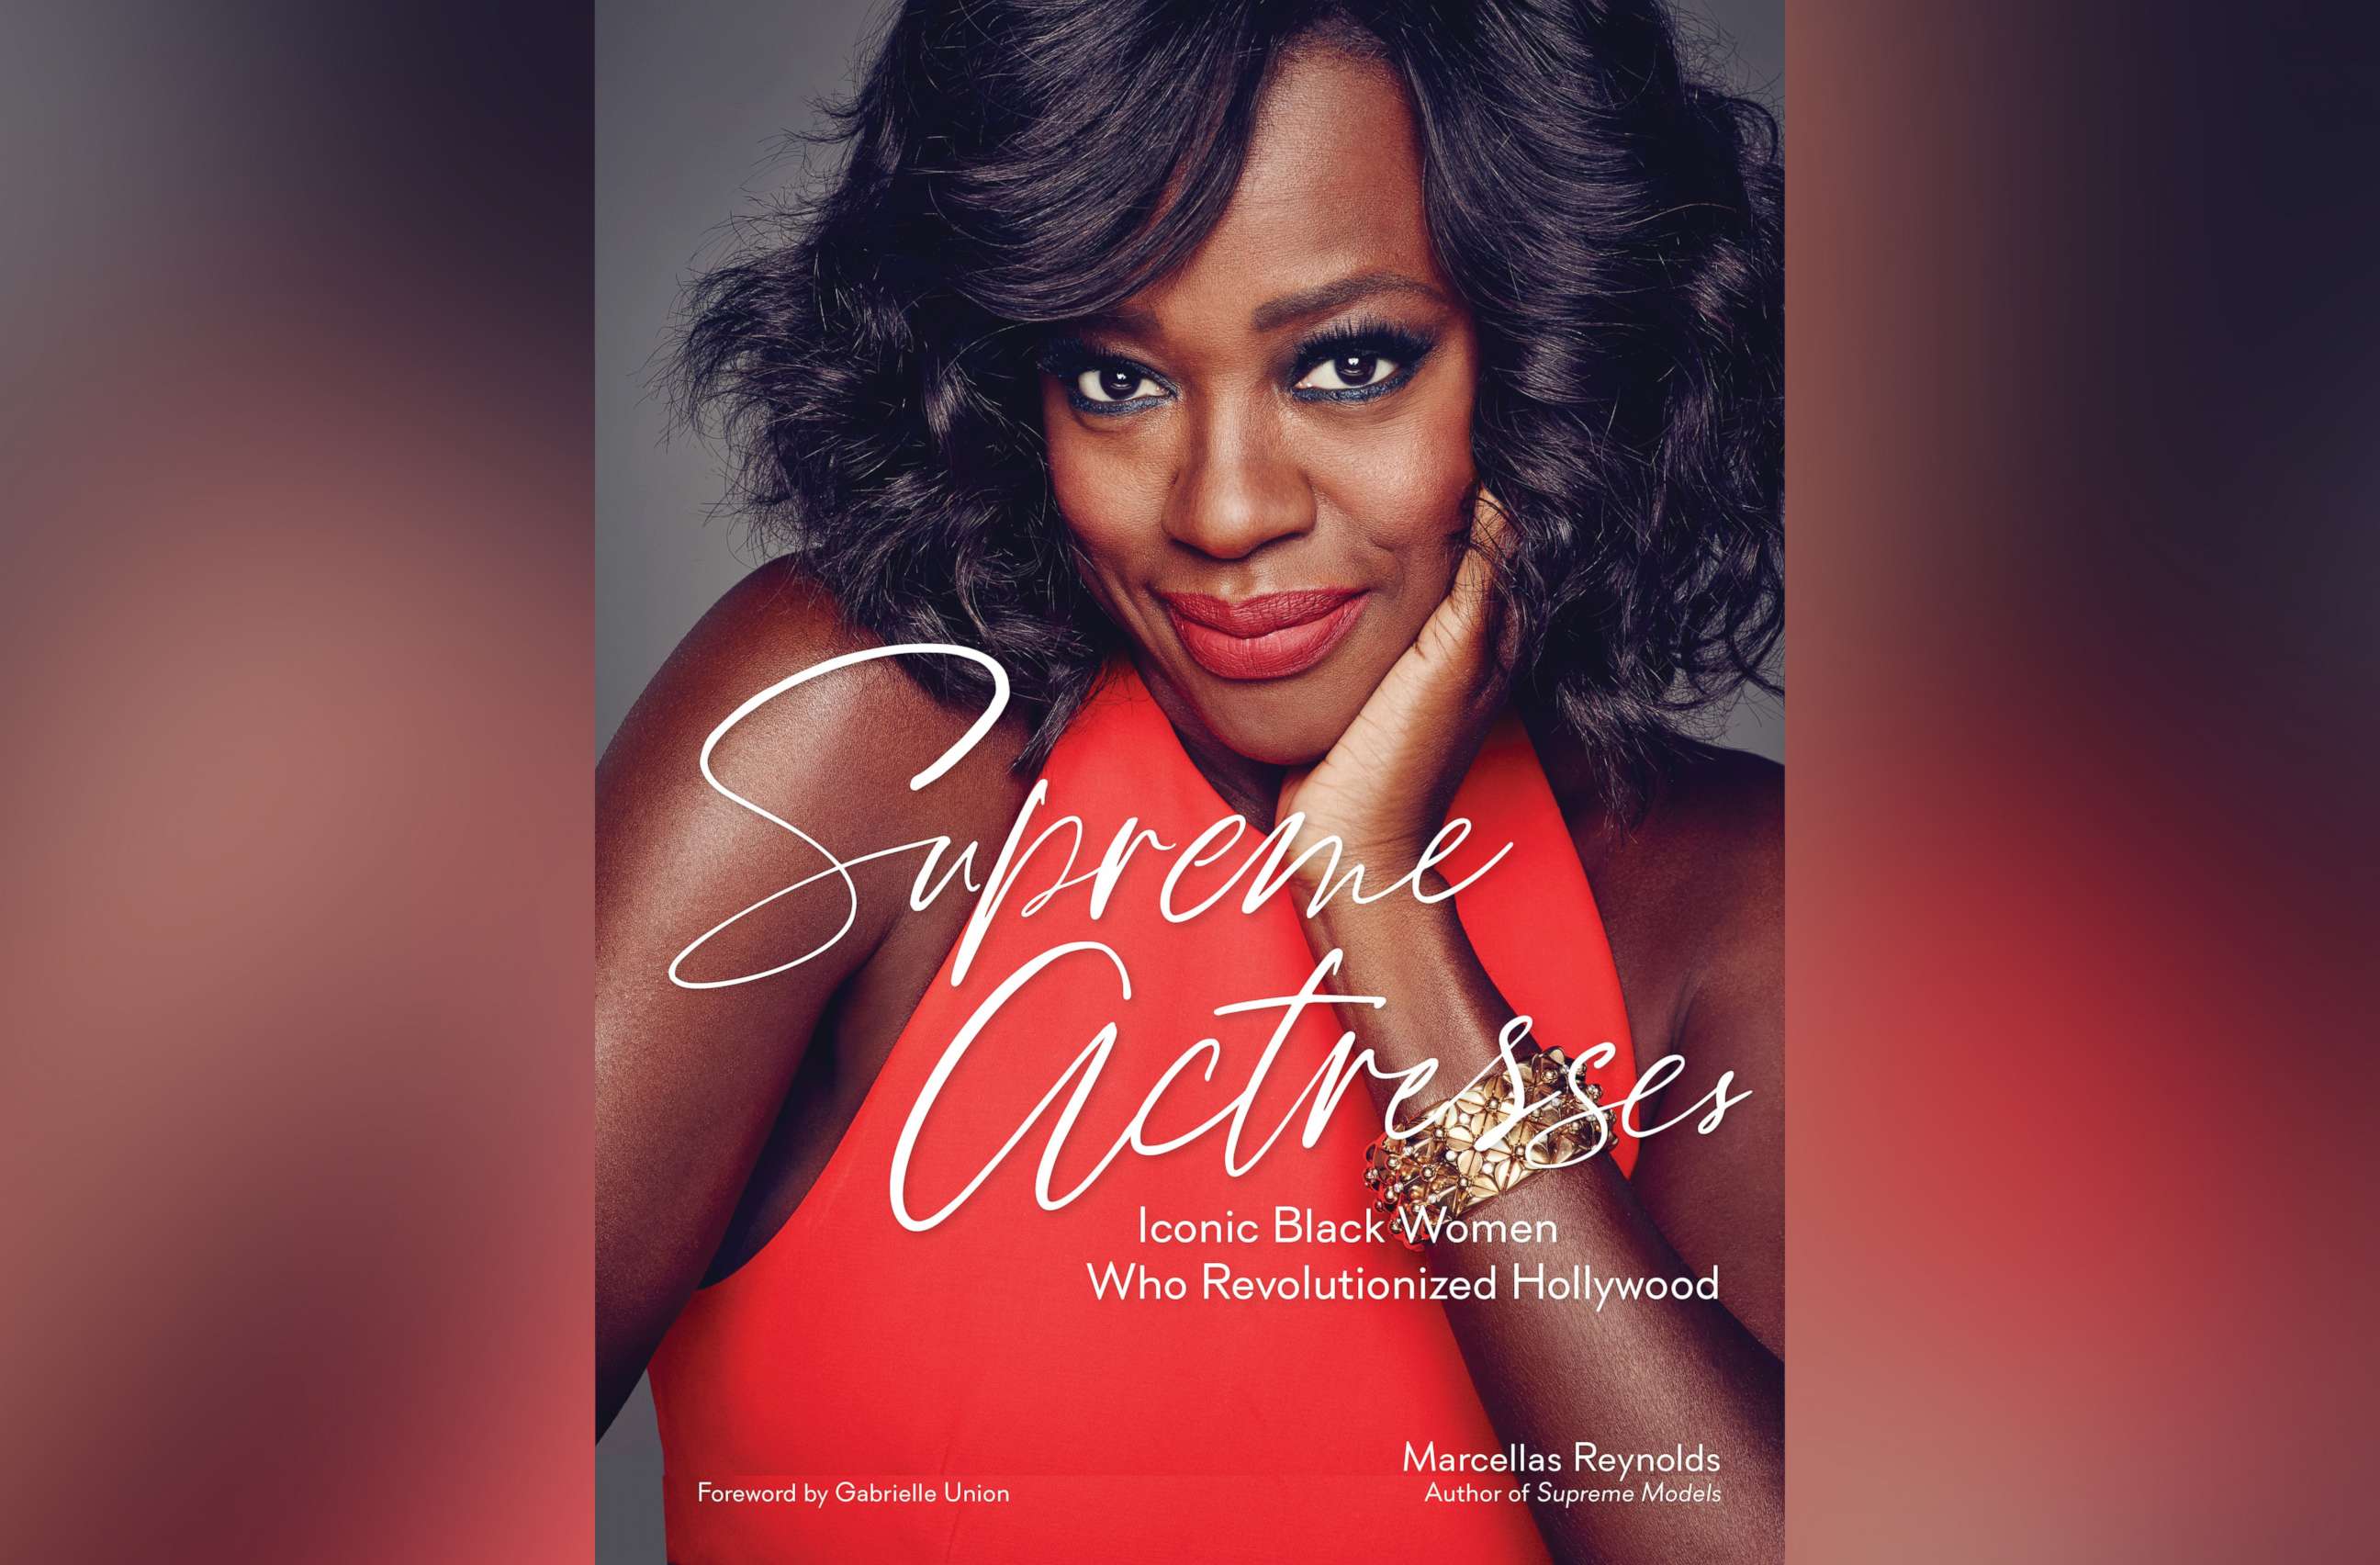 PHOTO: Viola Davis is featured on the cover of the book "Supreme Actresses".